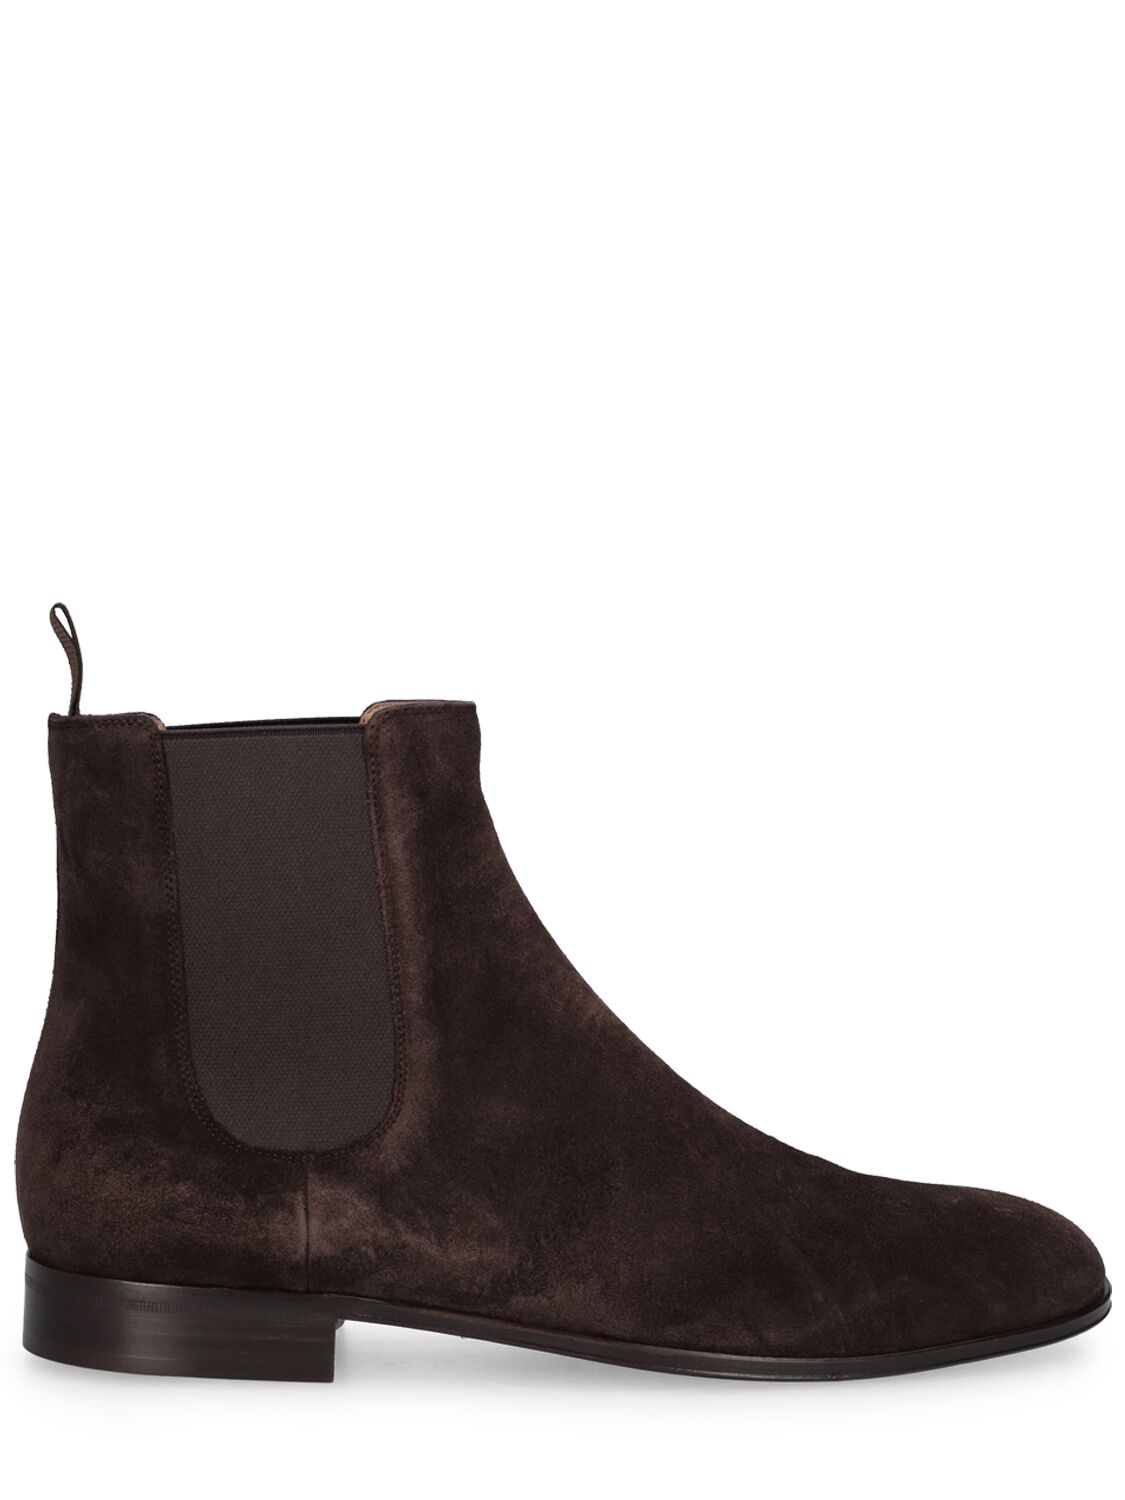 Image of Alain Suede Chelsea Boots